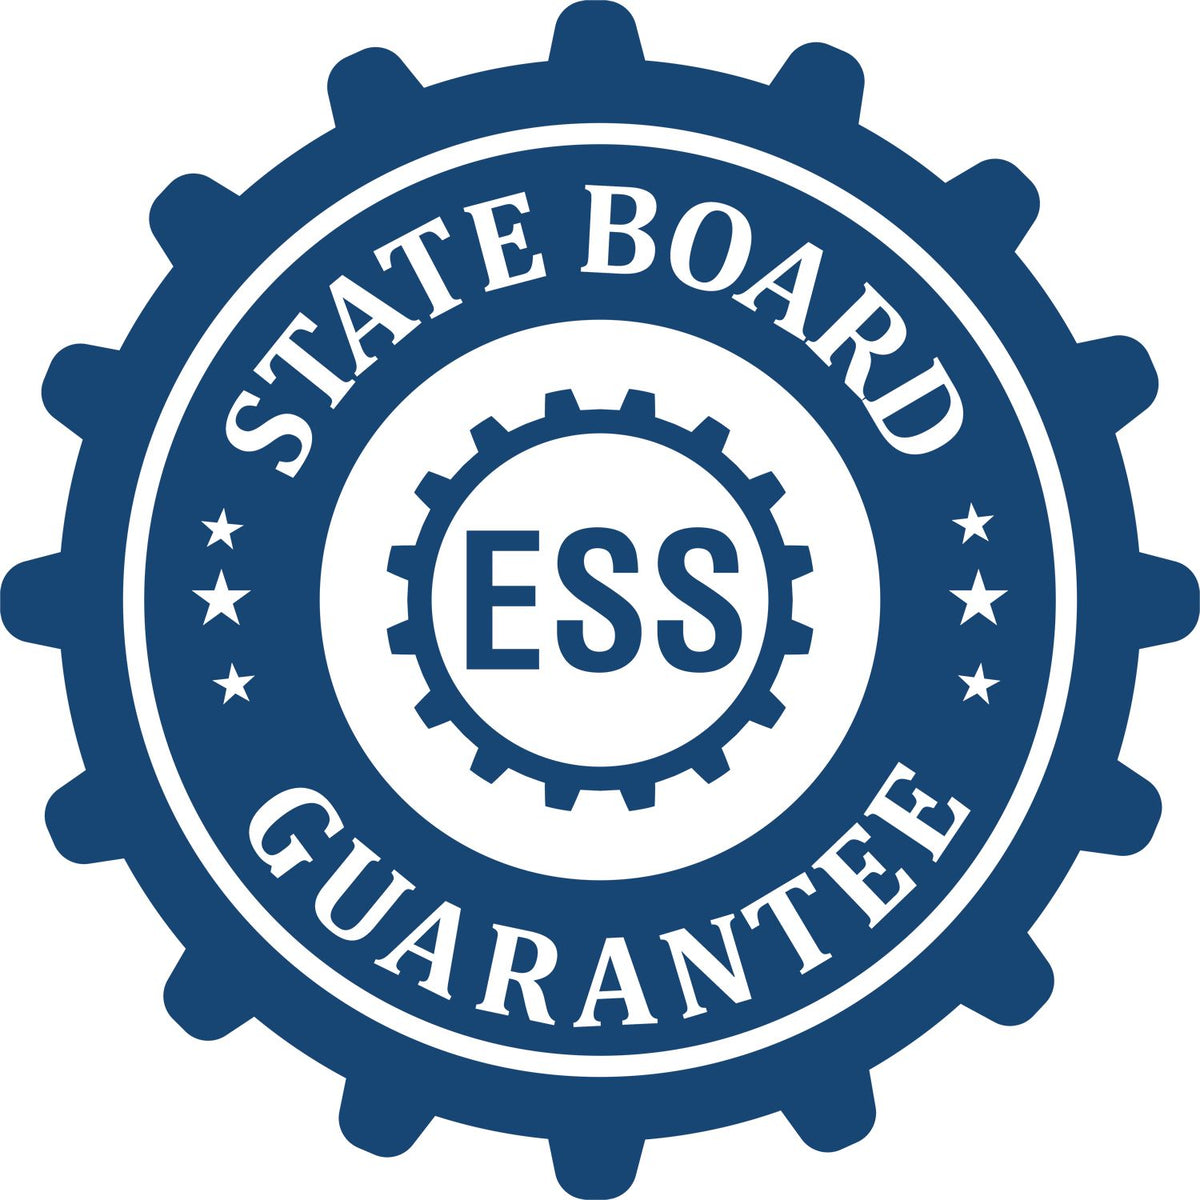 An emblem in a gear shape illustrating a state board guarantee for the Digital Hawaii PE Stamp and Electronic Seal for Hawaii Engineer product.